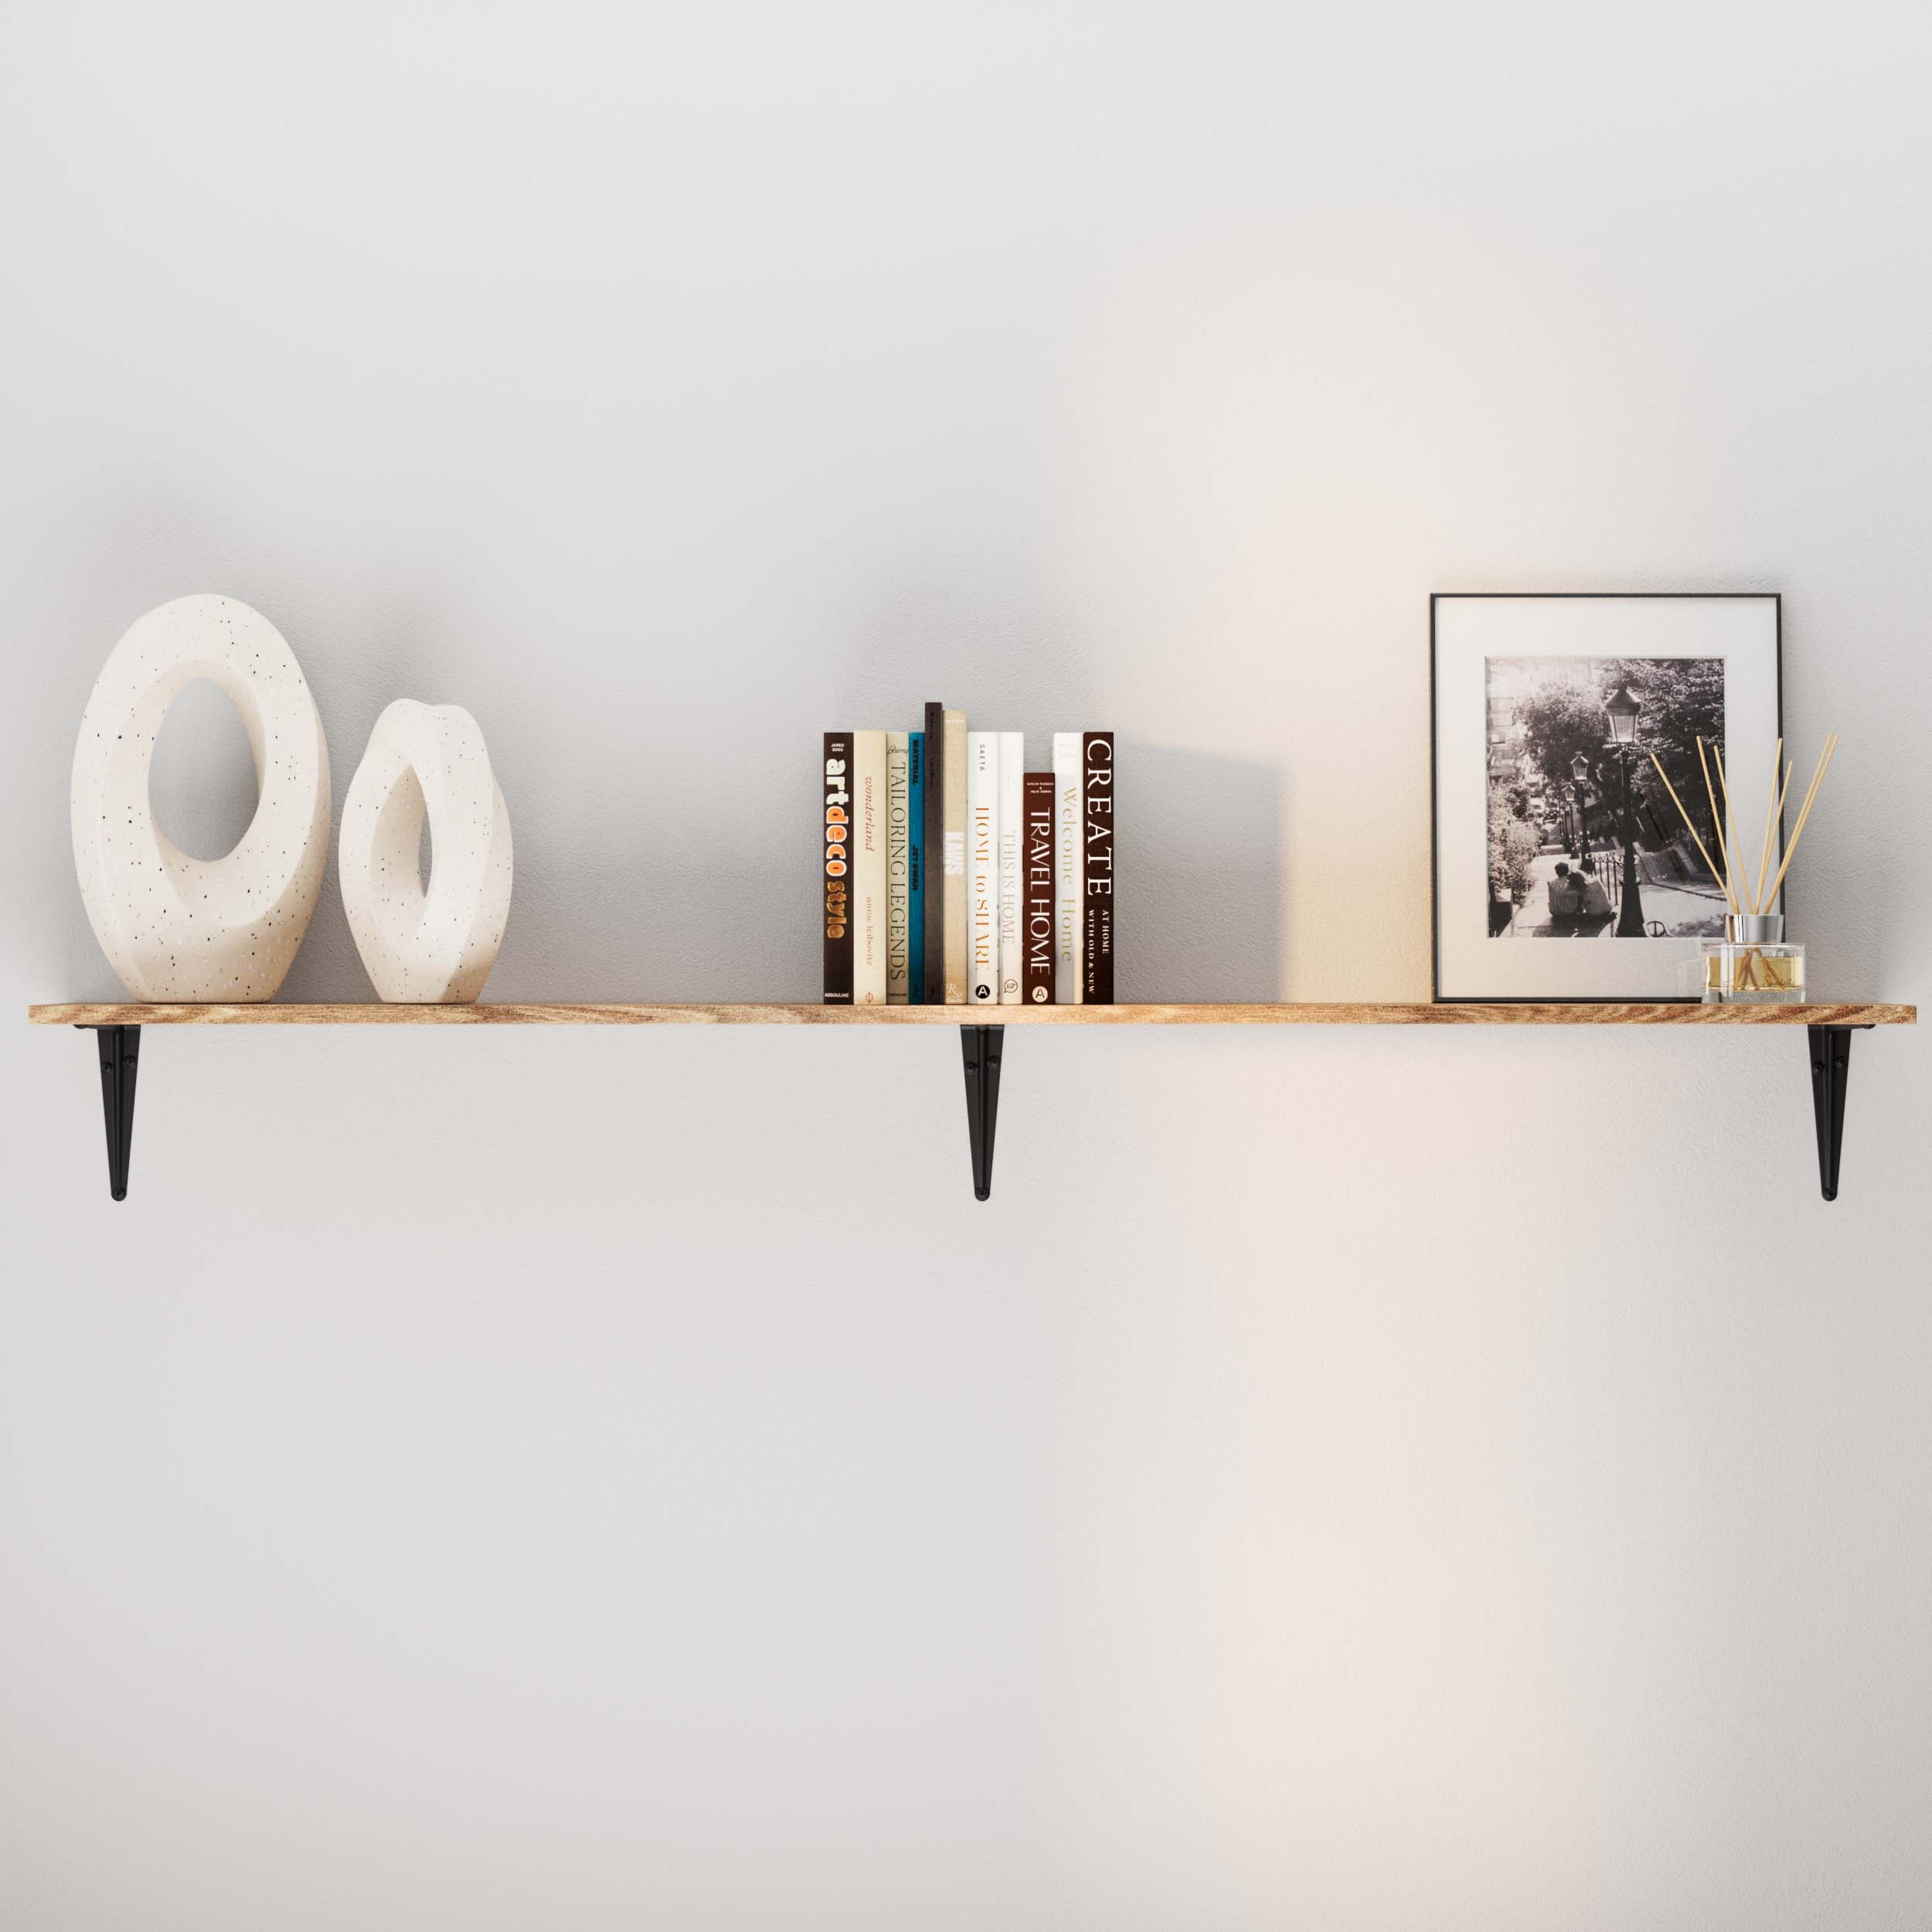 A stylish floating shelf burnt color holds two modern art sculptures, a stack of books, a framed black and white photo, and a decorative diffuser.